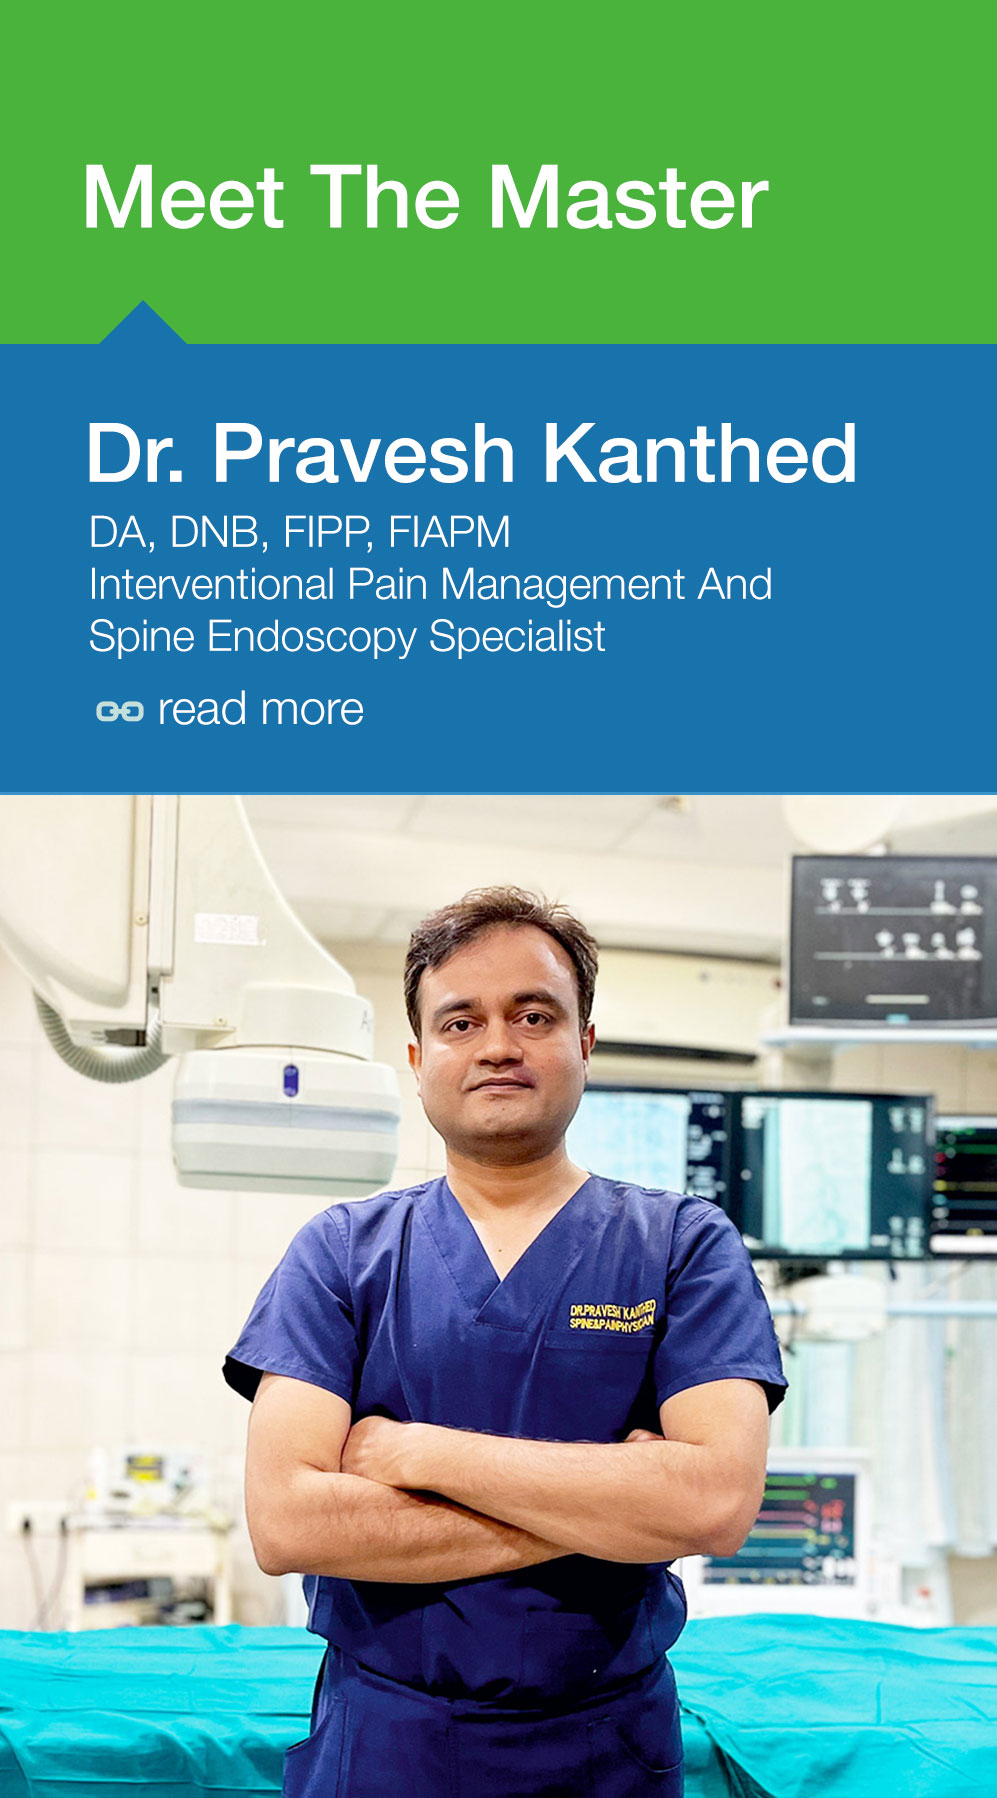 best spine pain treatment doctor in indore india dr pravesh kanthed spine endoscopy